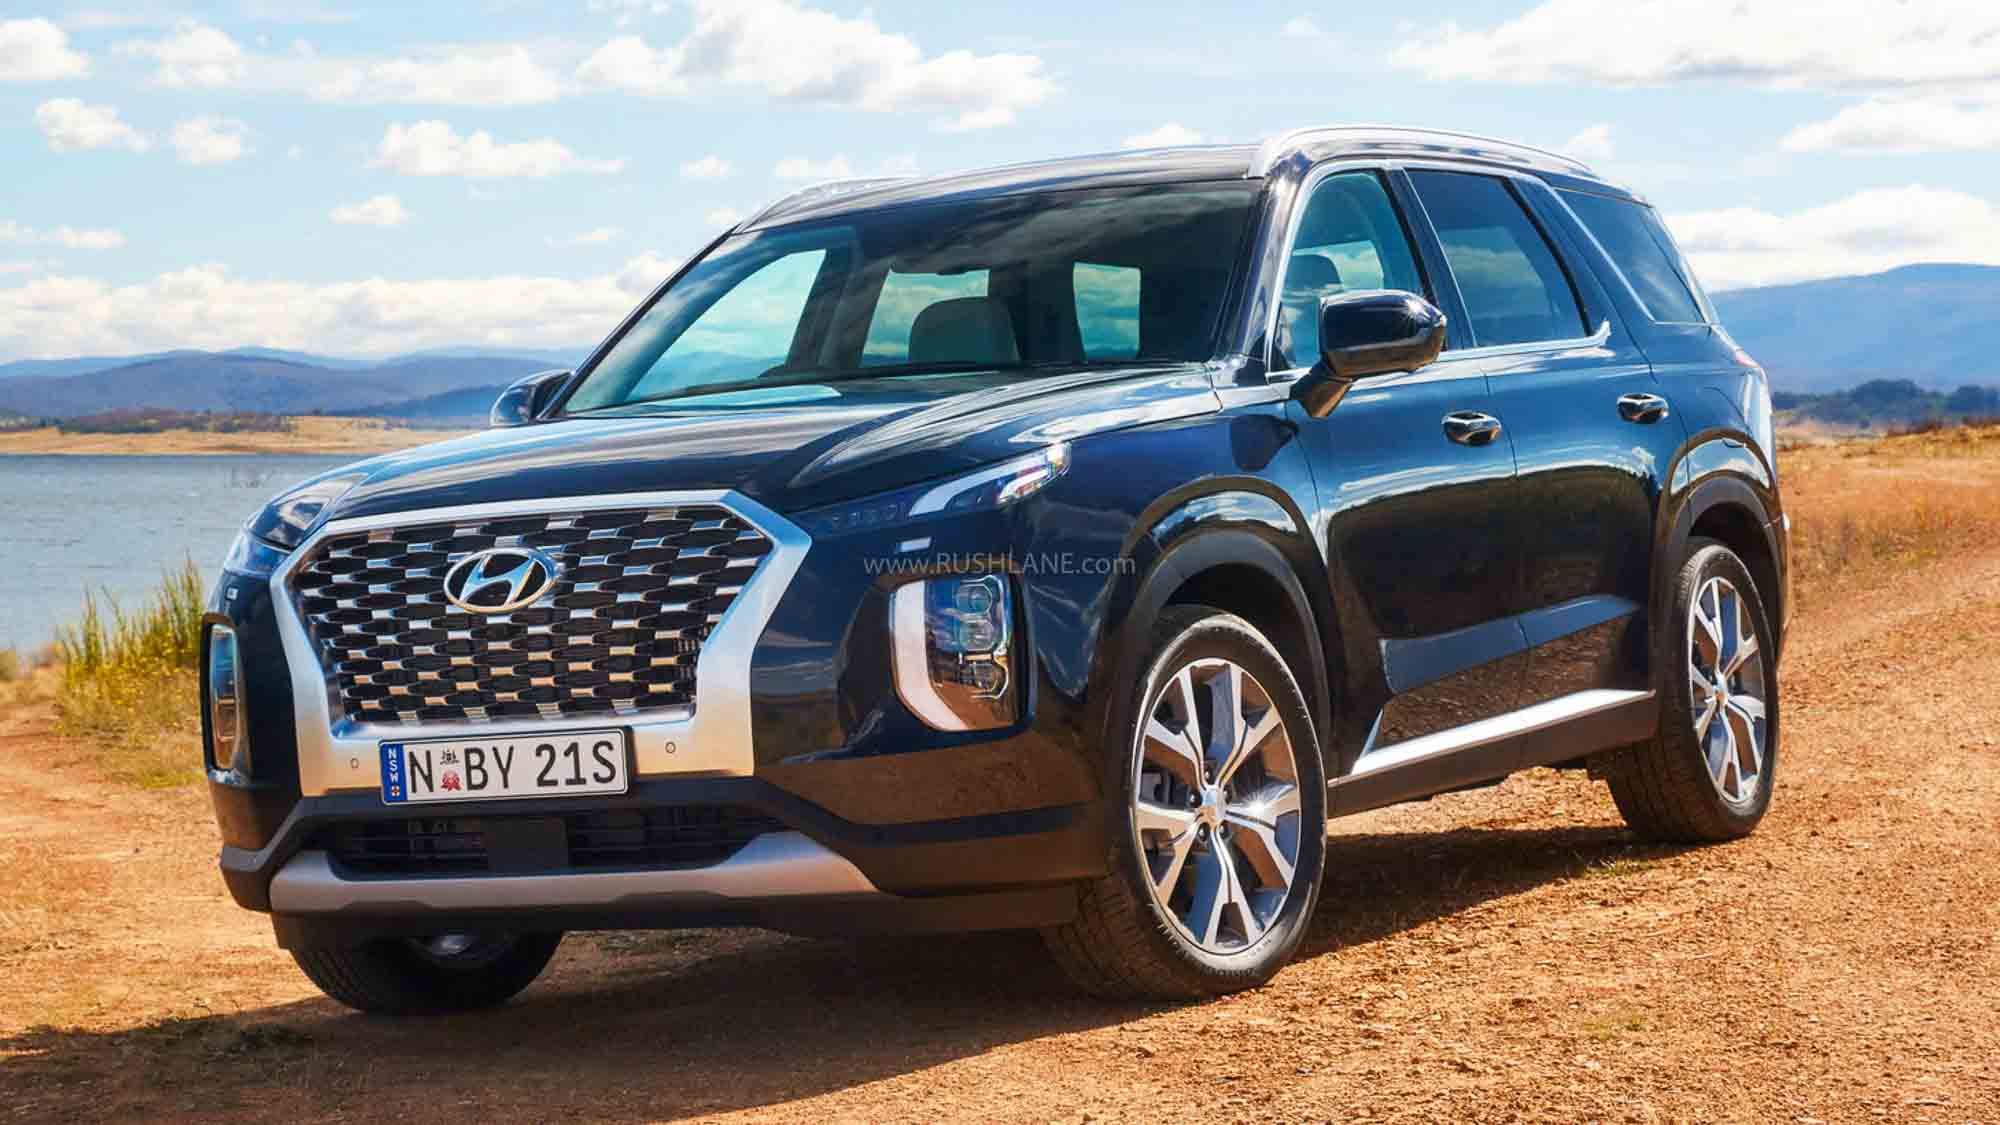 2021 Hyundai Palisade SUV Arrives In Australia Being Planned For 